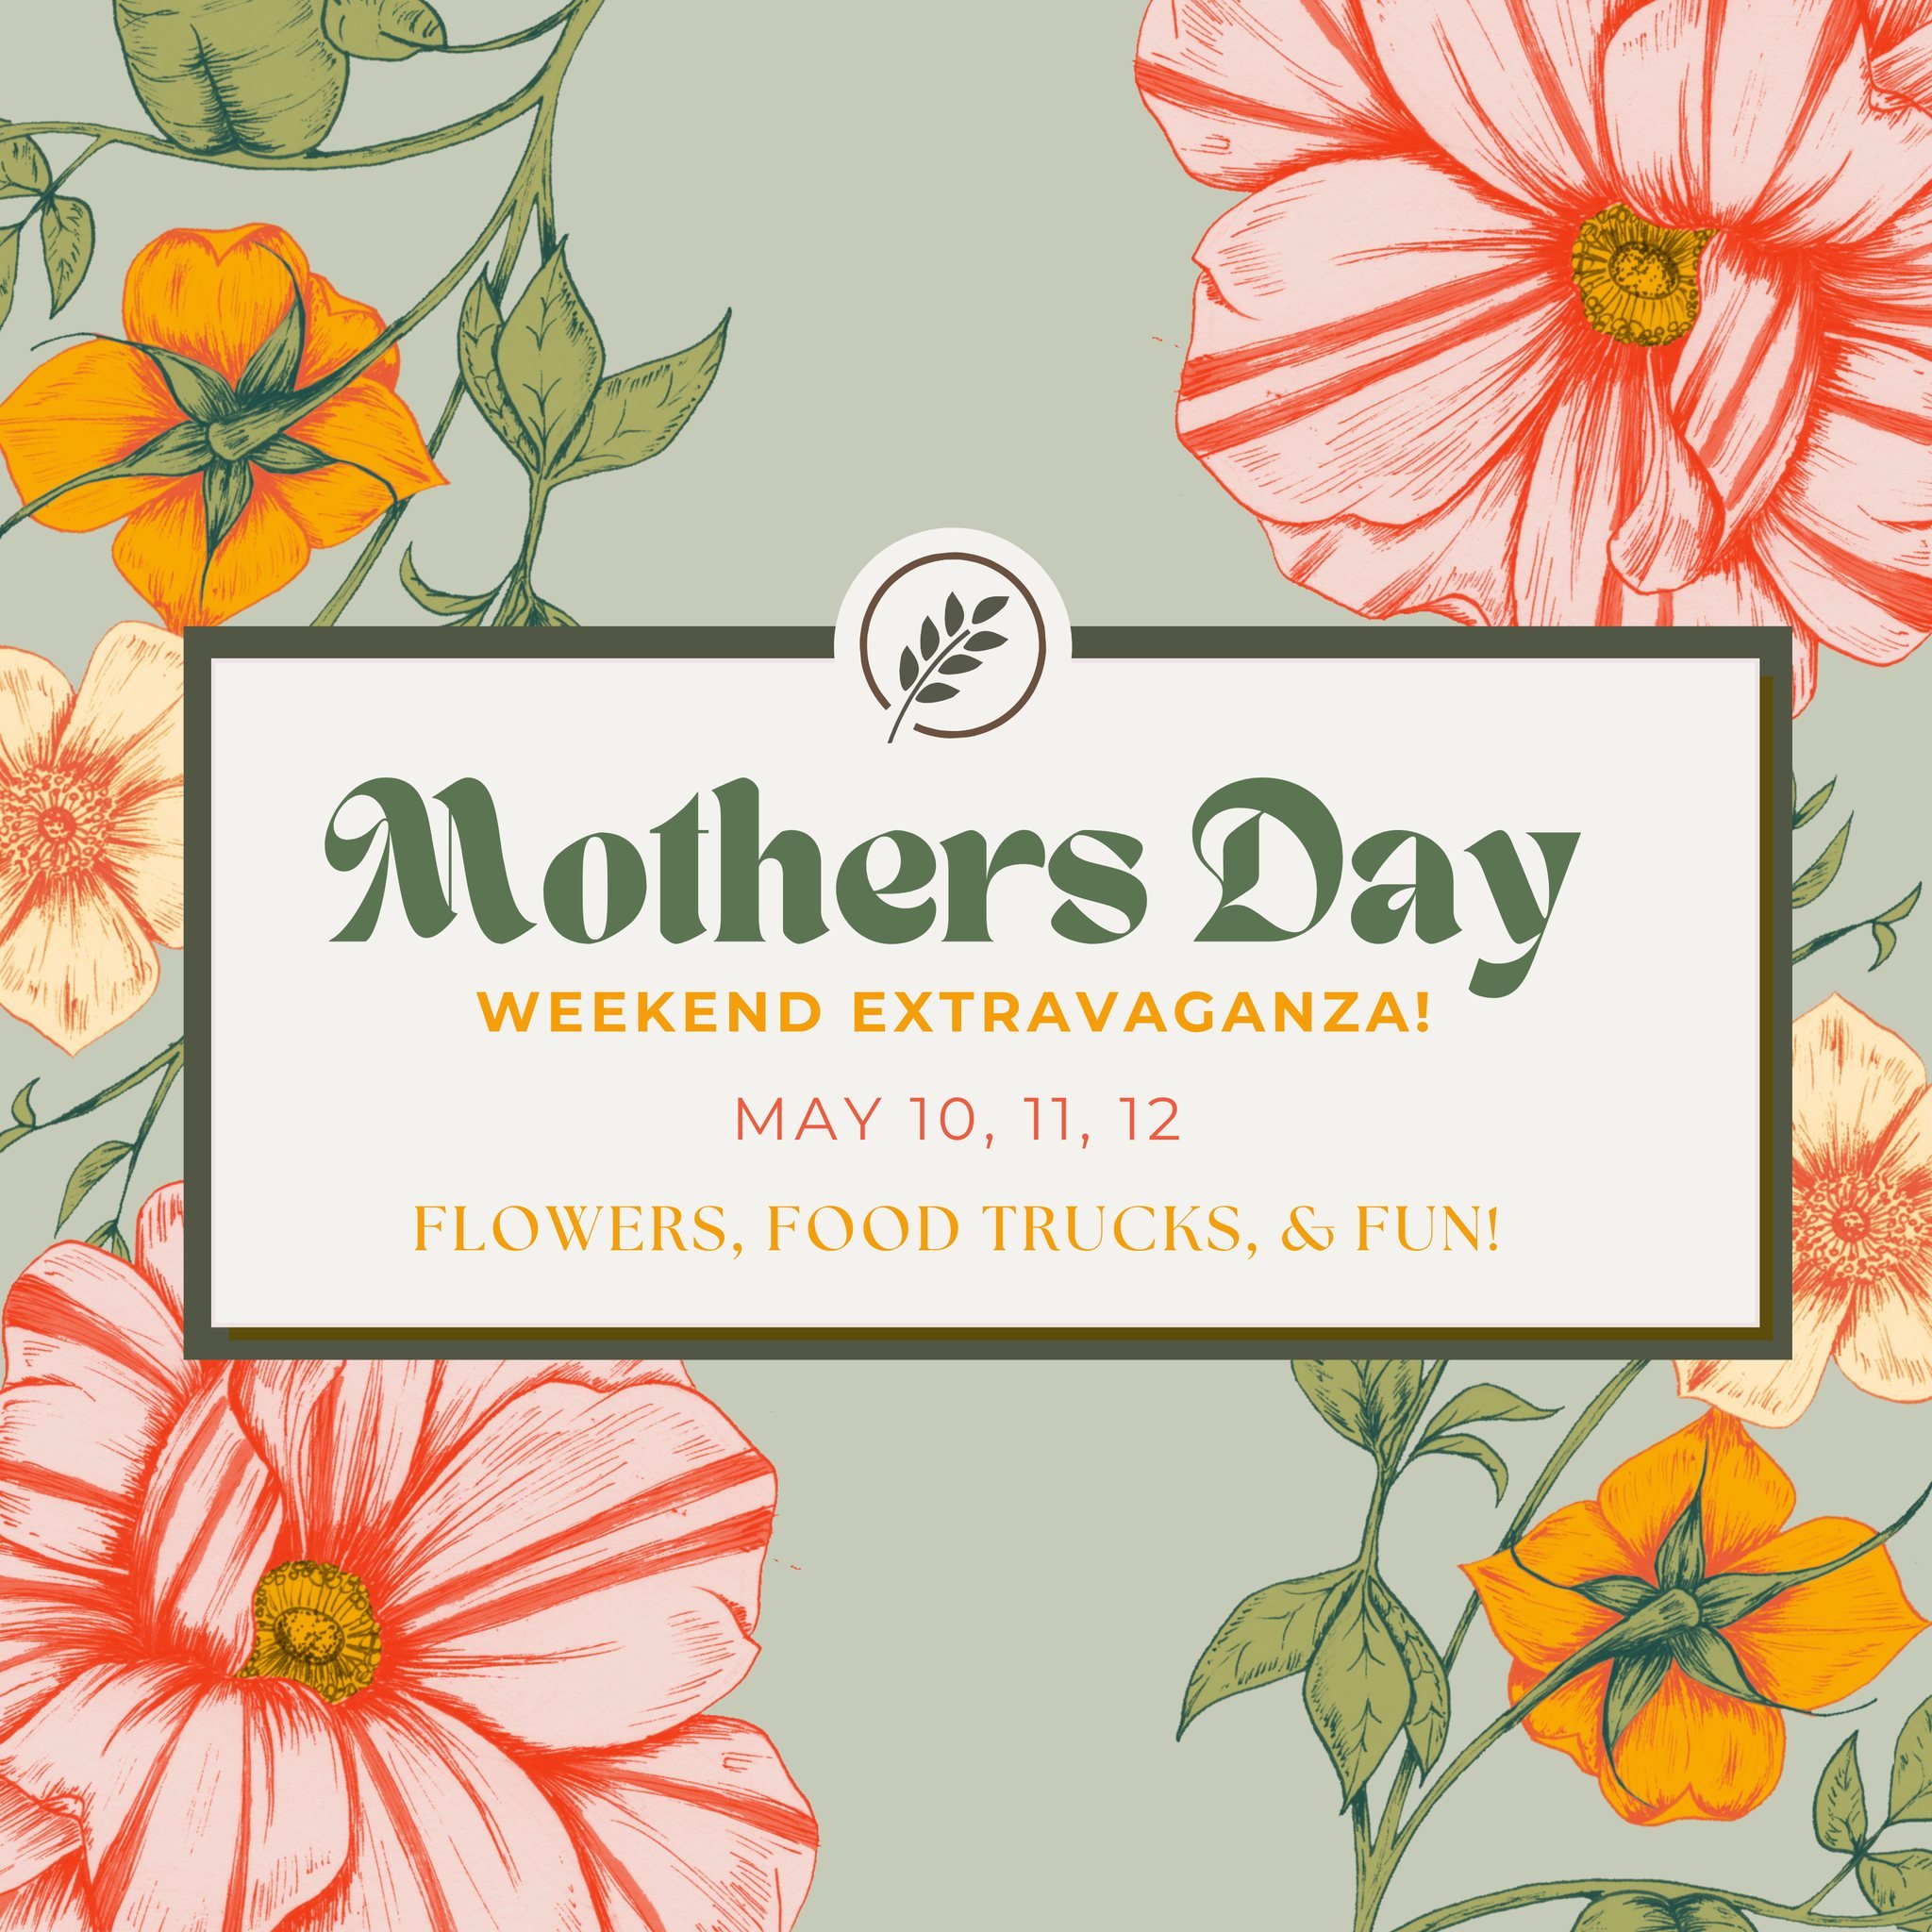 Mark your Calendars and make plans with Mom this weekend to visit Down to Earth for our Mother's Day Weekend Extravaganza!!! 🌸🌼🌺

Bring in Mom, Grandma...ALL the mothers in your life to stroll through our boutique, greenhouse and grounds. Let them